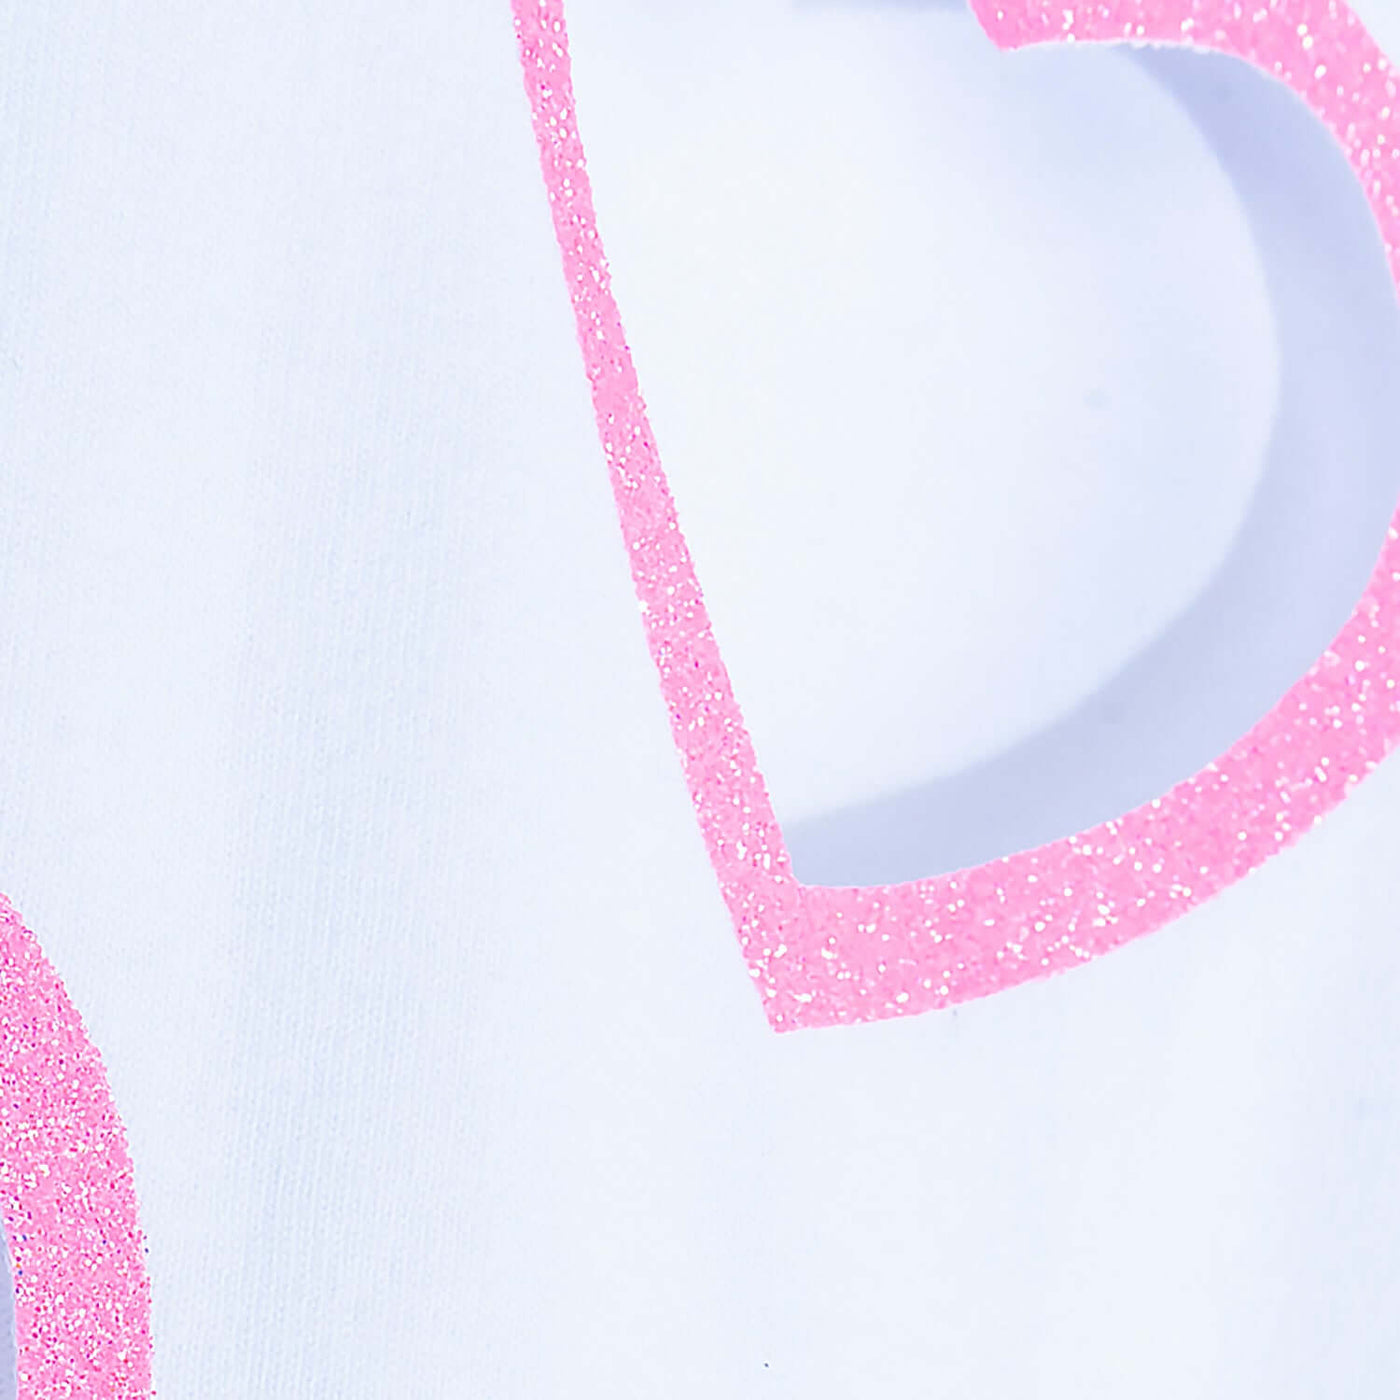 Oversize Tee "Flying Hearts" - white (Detail))